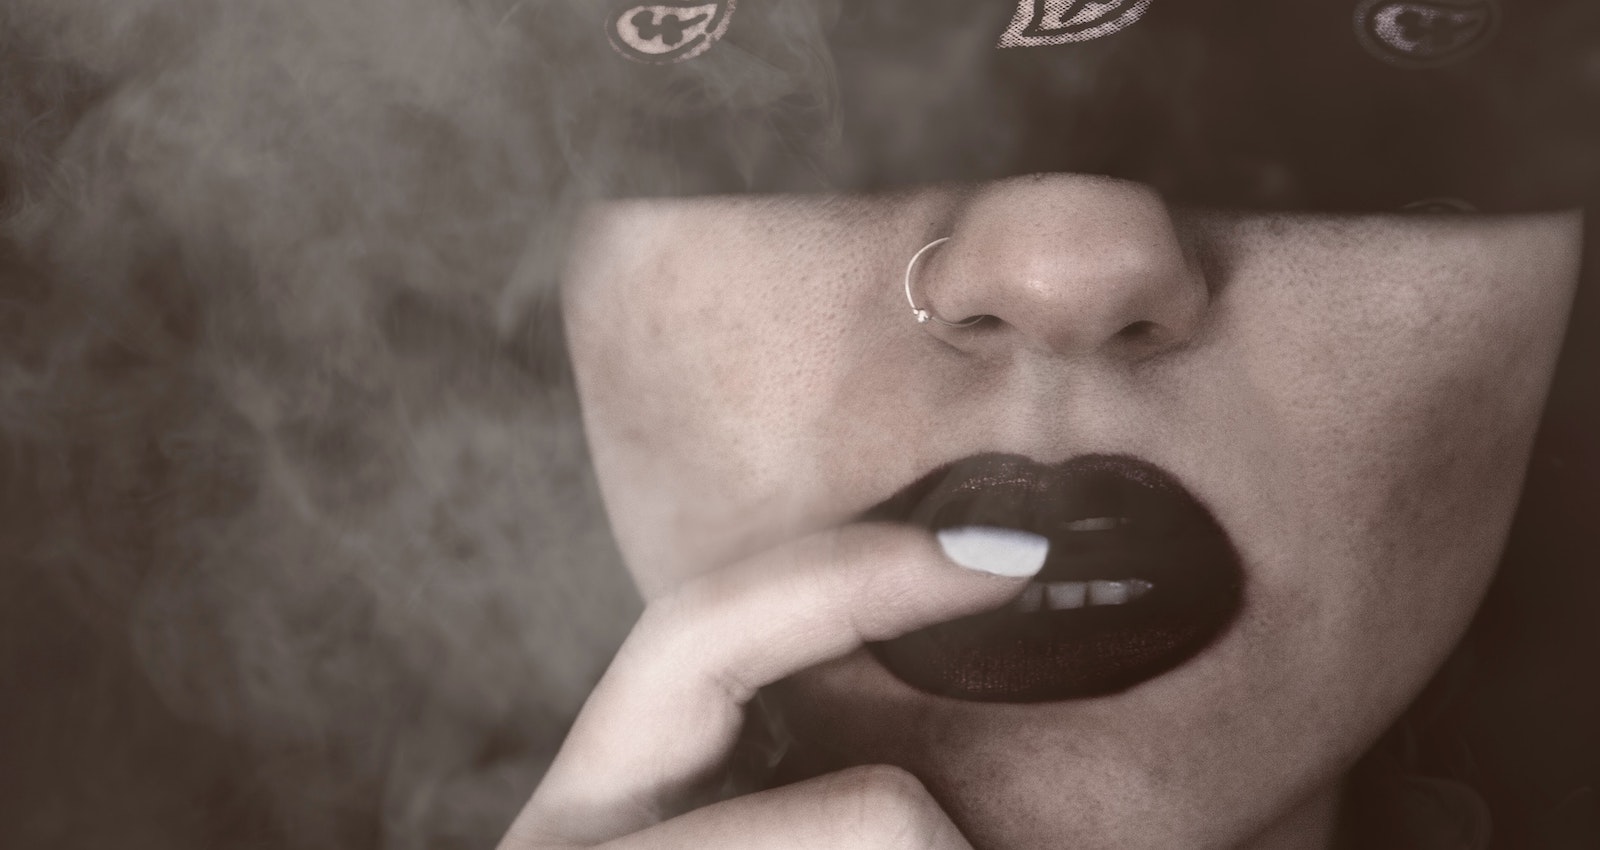 Tomas Andreopoulos/Pexels https://www.pexels.com/photo/blindfolded-woman-with-finger-on-lips-grayscale-portrait-731864/